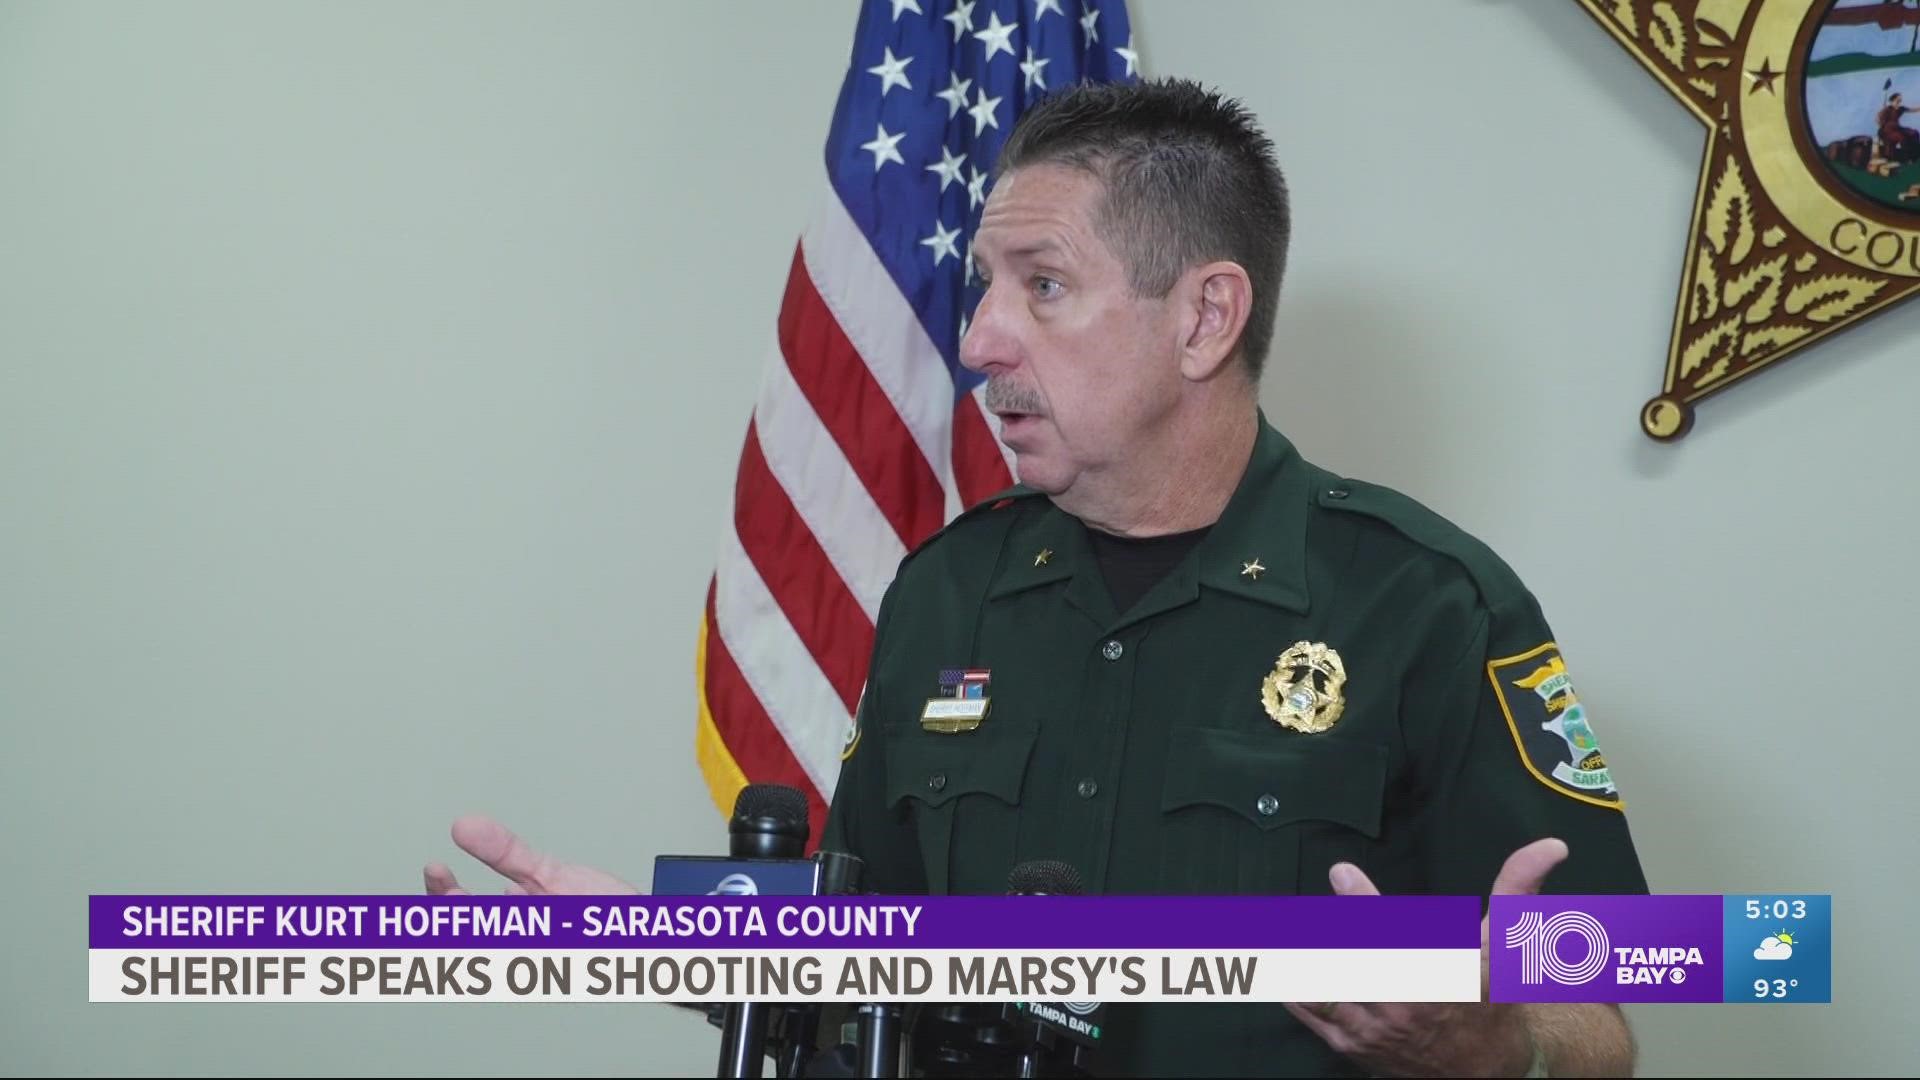 A judge granted the Sarasota Herald-Tribune the right to name two deputies involved in a deadly April shooting. The state Supreme Court is considering the law now.